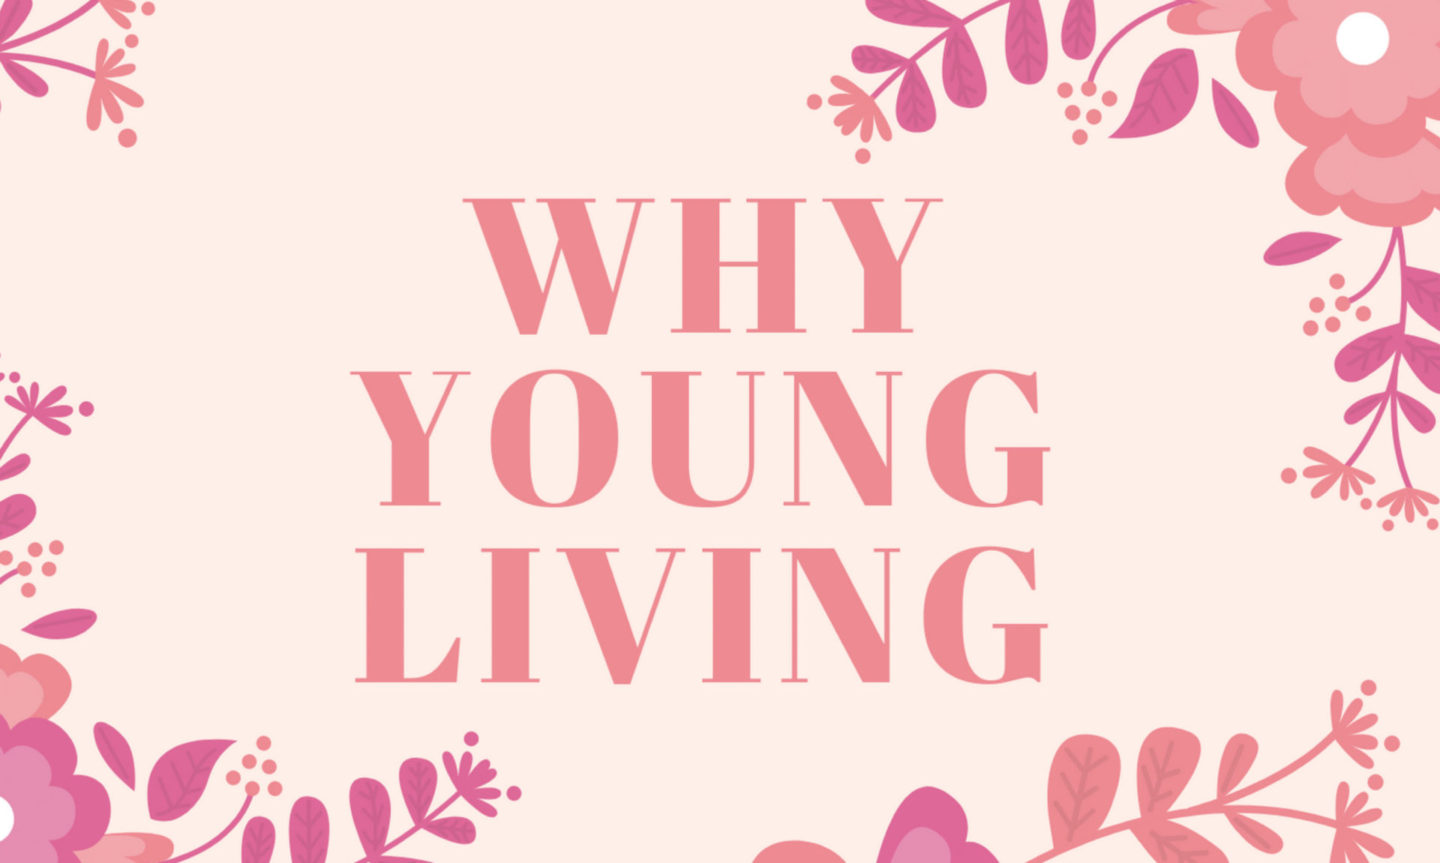 Why Young Living